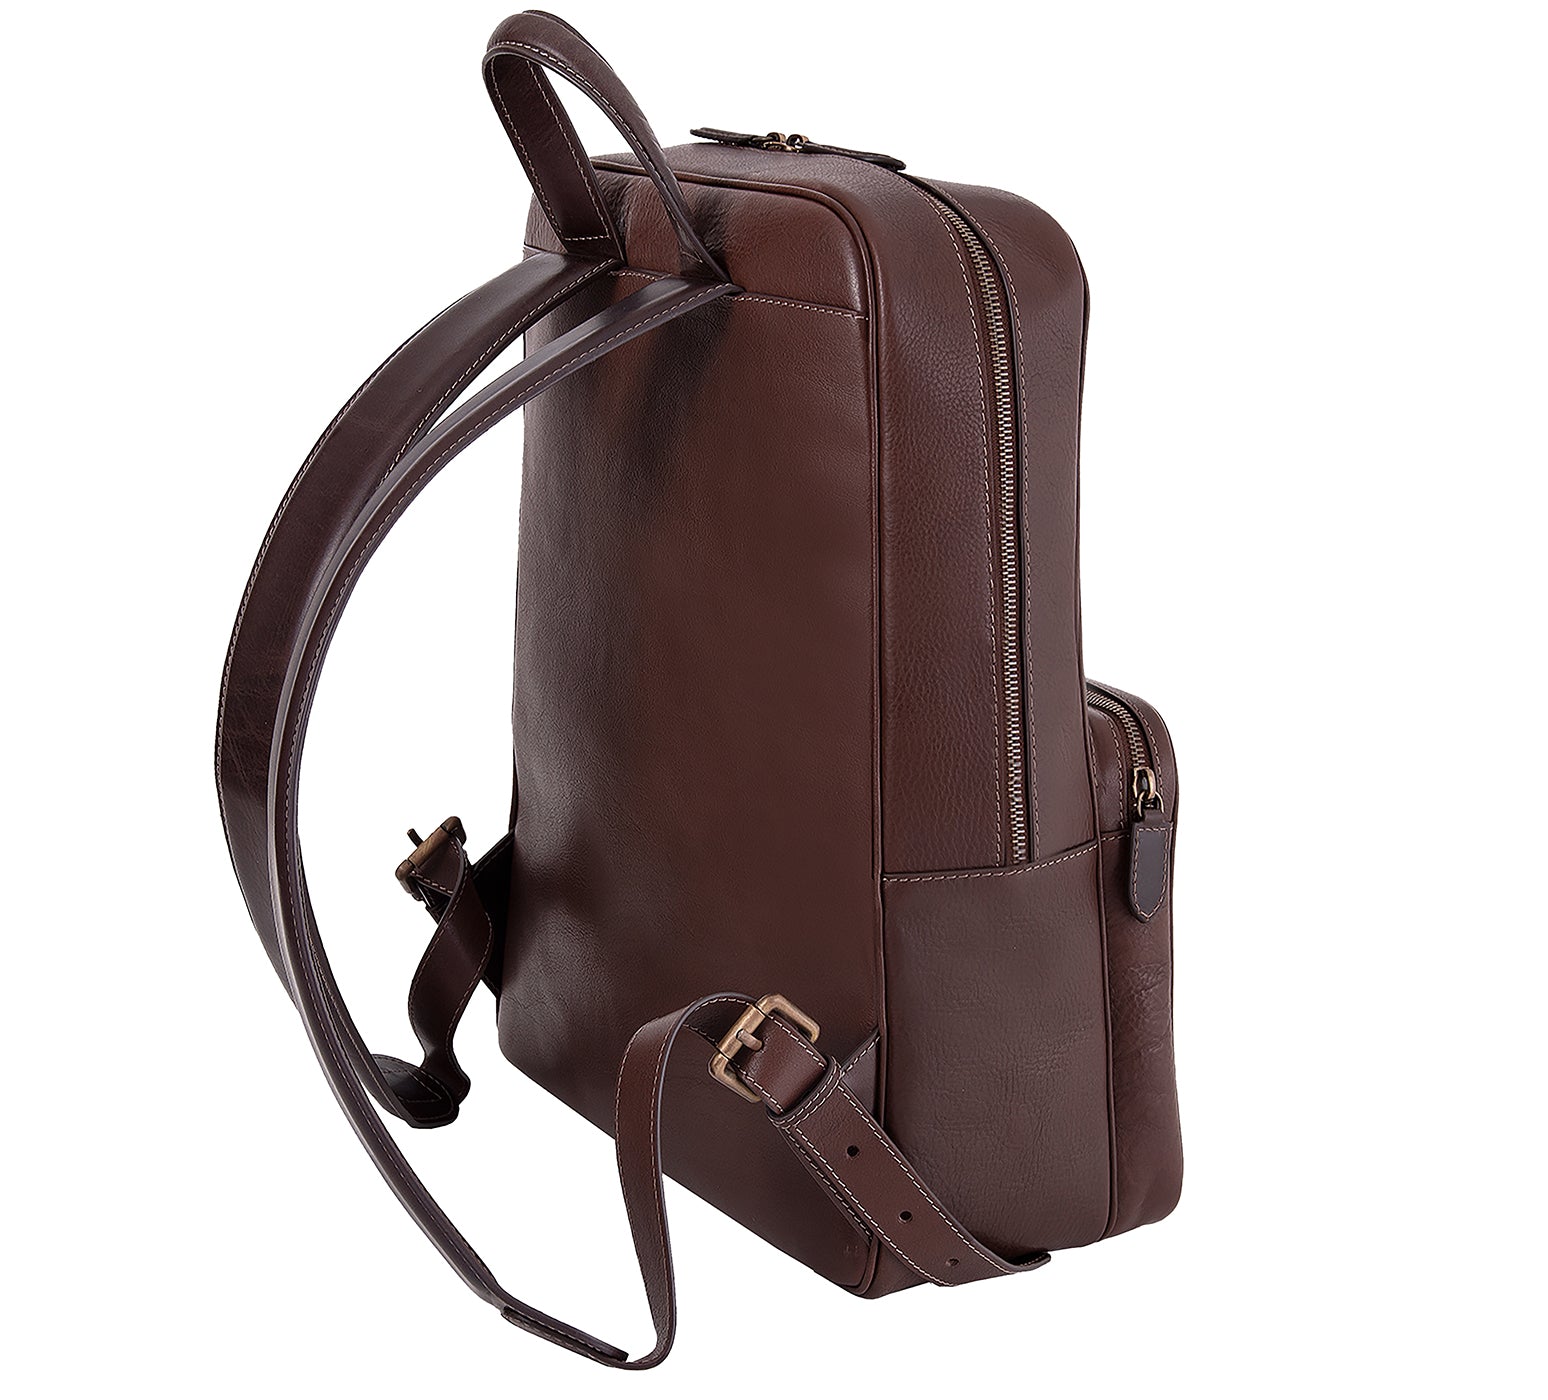 The Henley Mens Leather Backpack from Rydal in 'Dark Brown' showing shoulder straps.